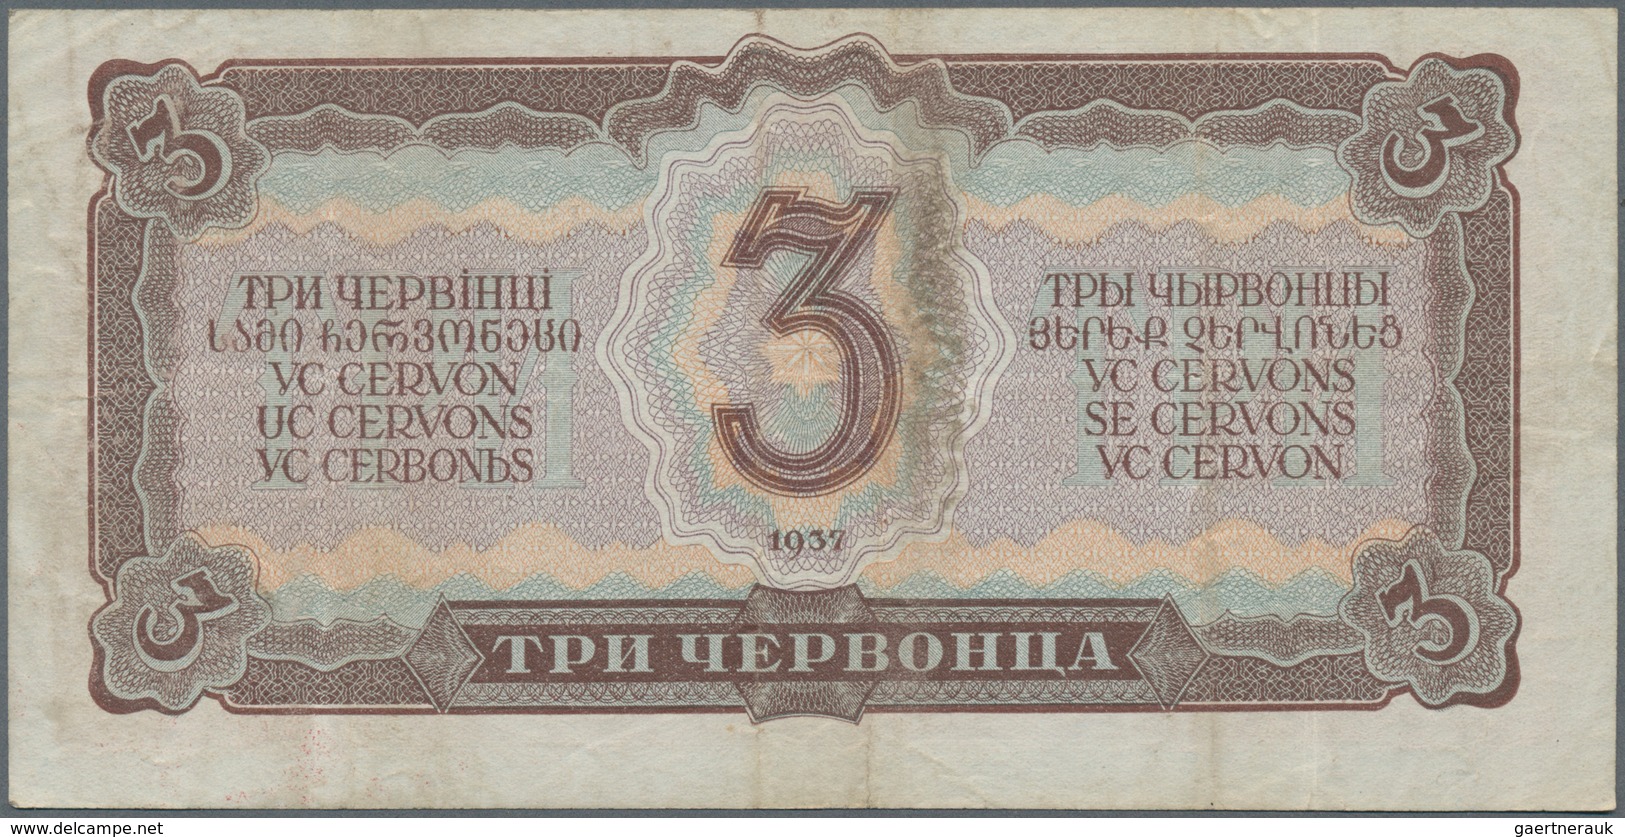 Russia / Russland: Small album with about 200 banknotes and local and regional issues dated 1899 til